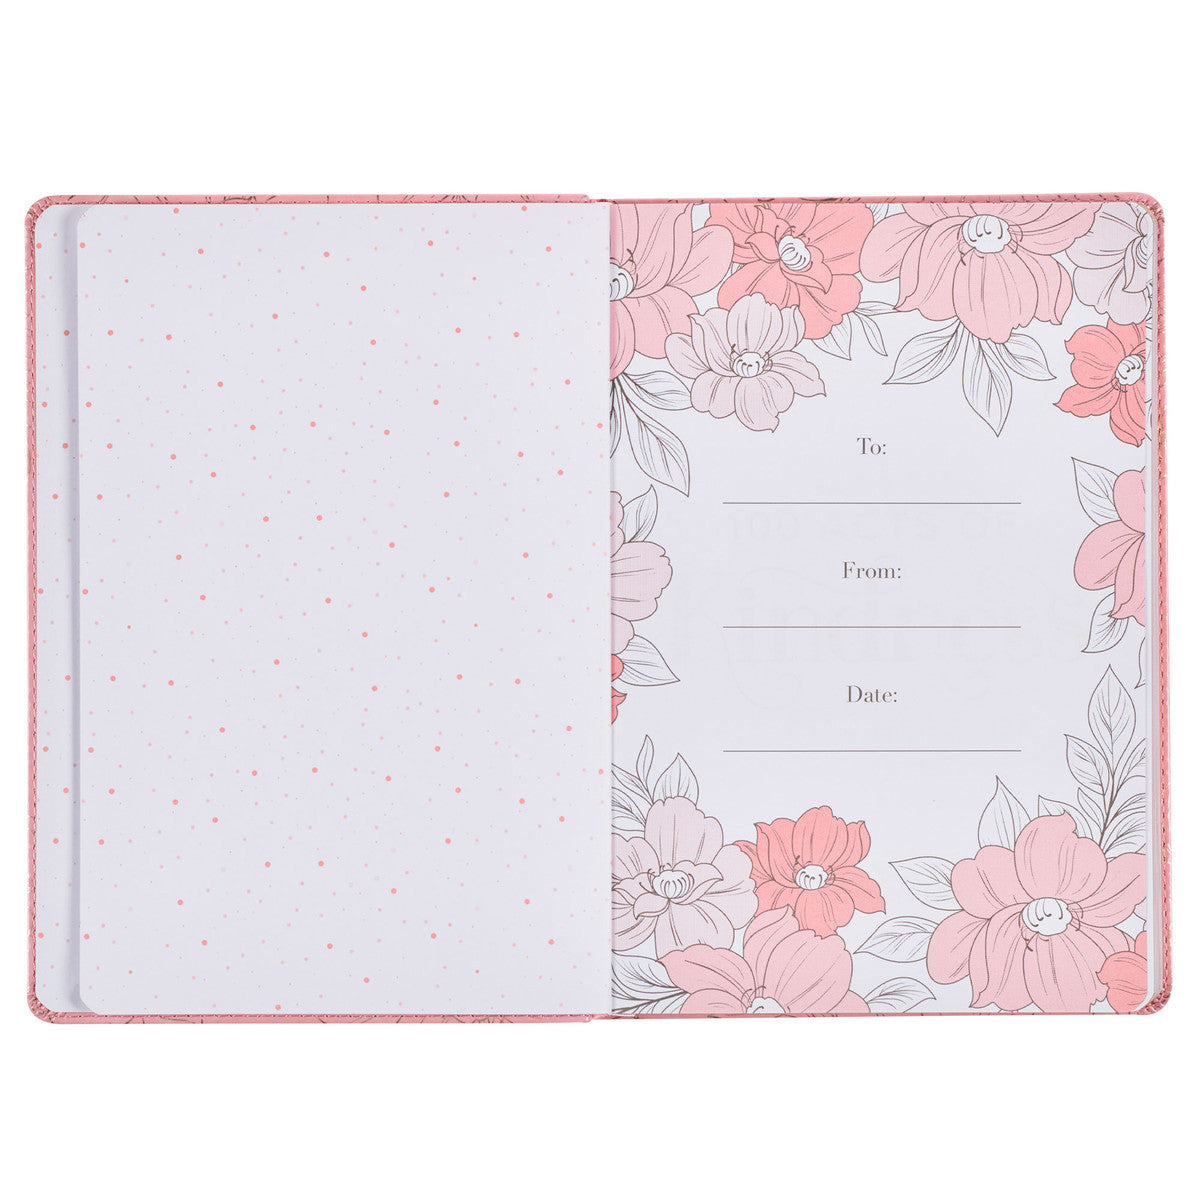 100 Acts of Kindness Pink Faux Leather Devotional